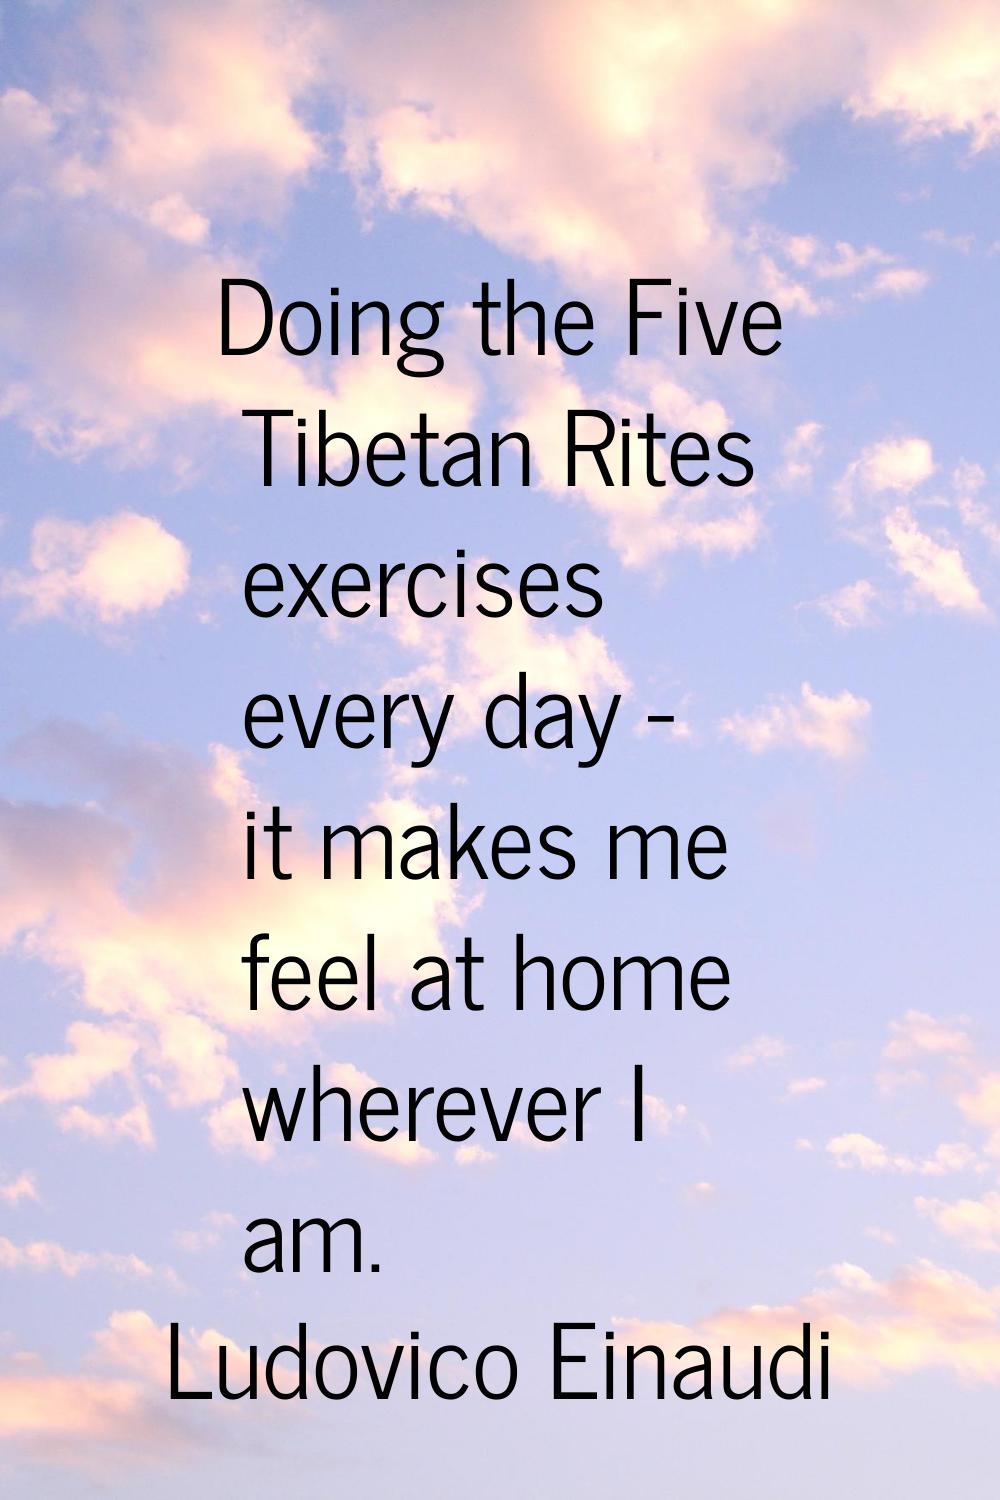 Doing the Five Tibetan Rites exercises every day - it makes me feel at home wherever I am.